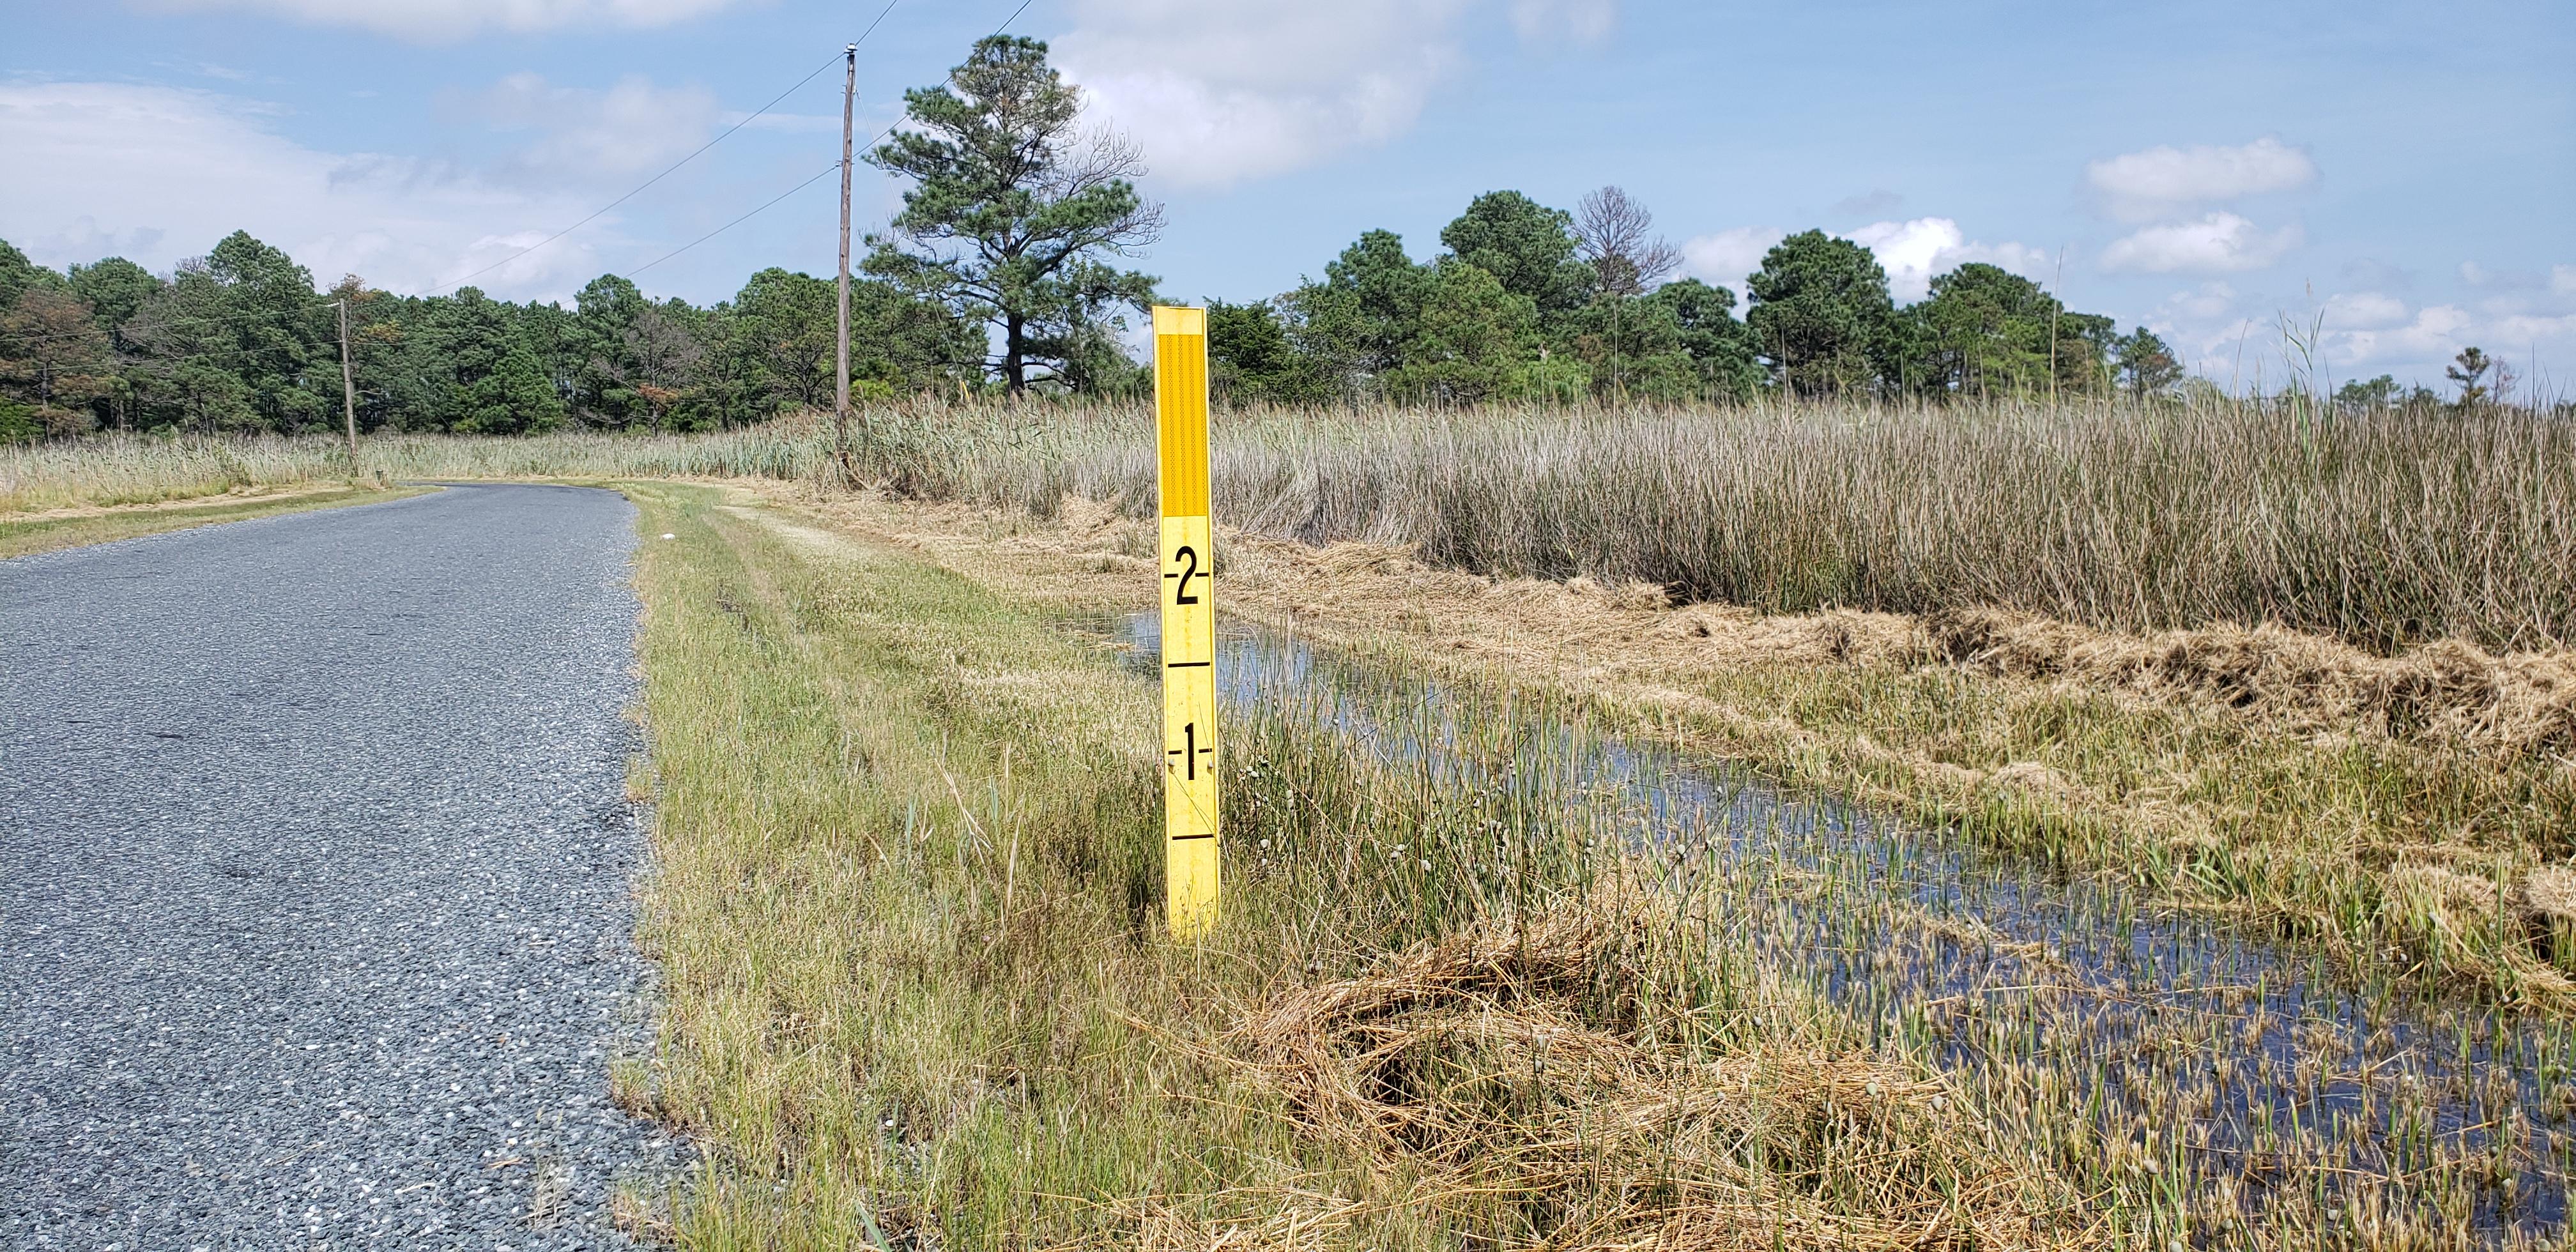 Image of a rural road with a yellow marker next to the roadside ditch. The marker has one and two foot marks on it to show the level of water when it floods.